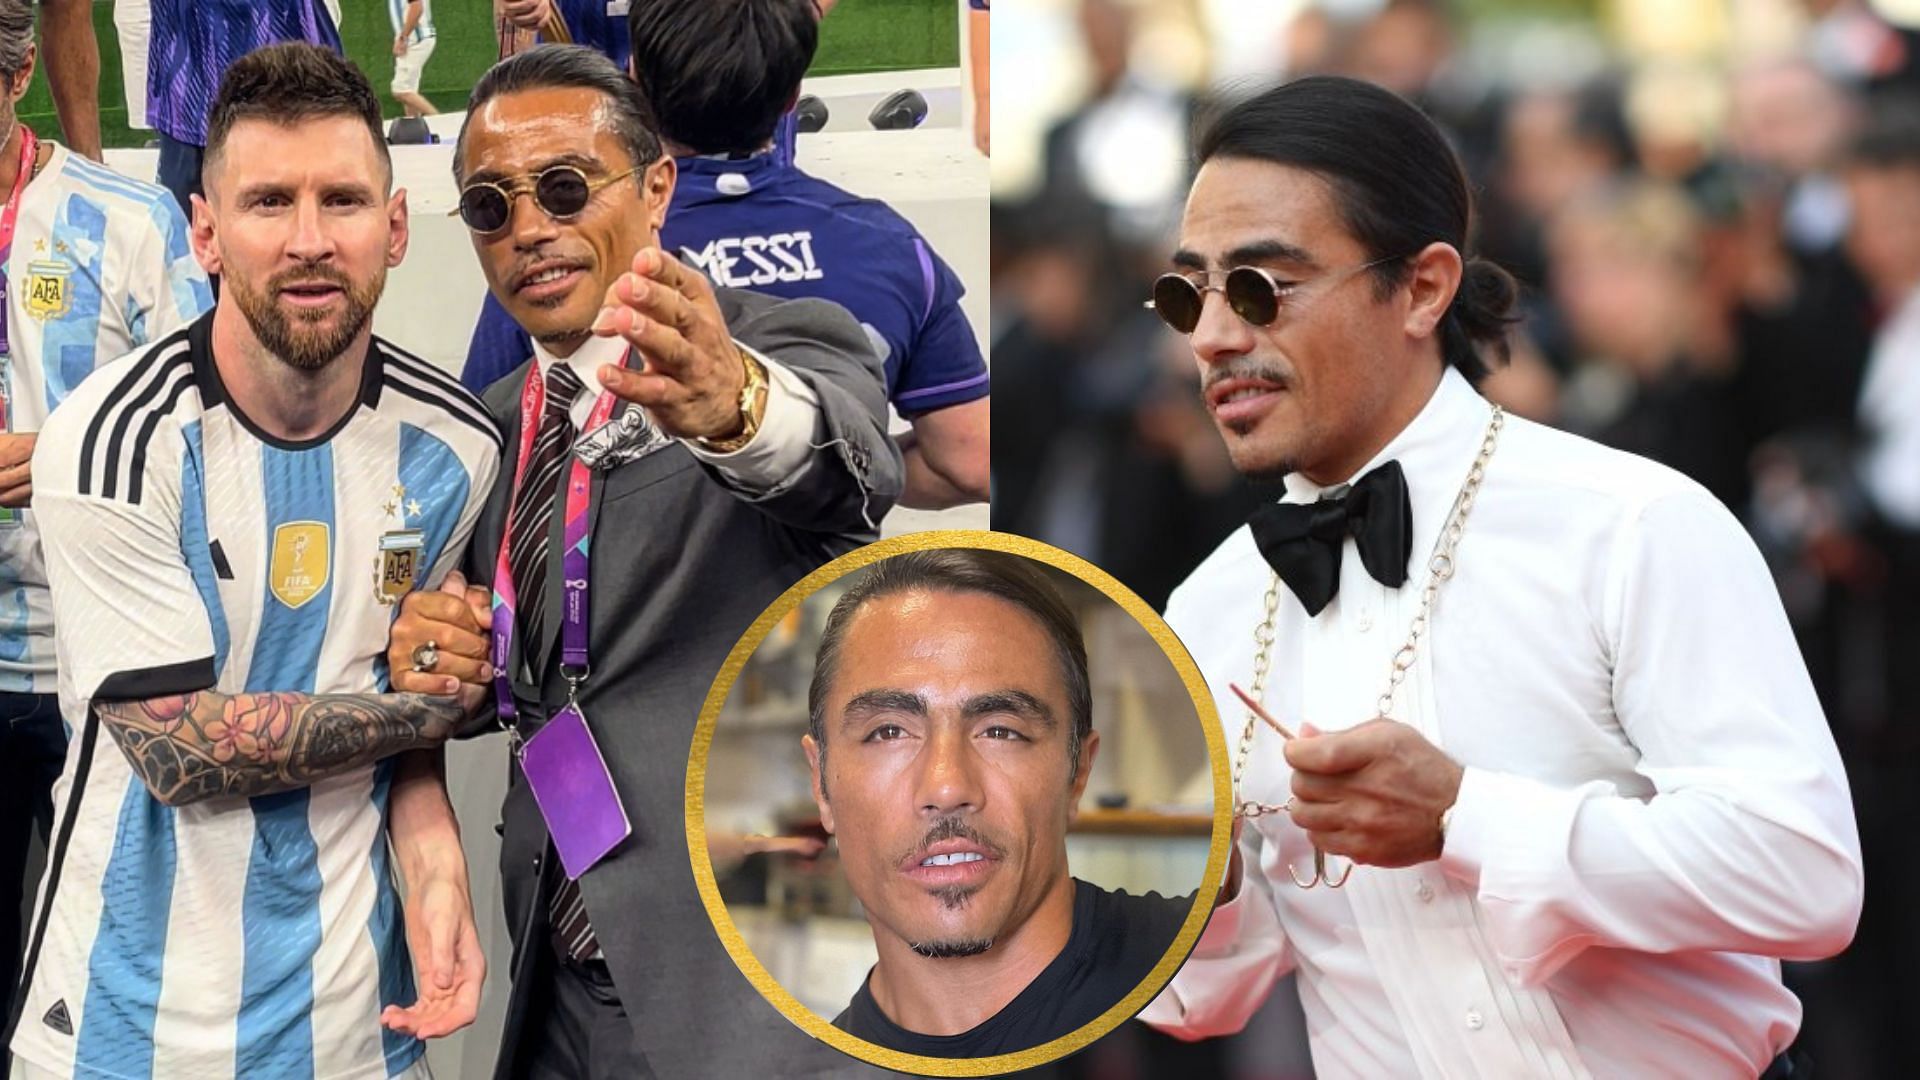 Salt Bae without his glasses on has been an interesting sight (Image via Instagram/@nusr_et and Getty/Loic Venance)